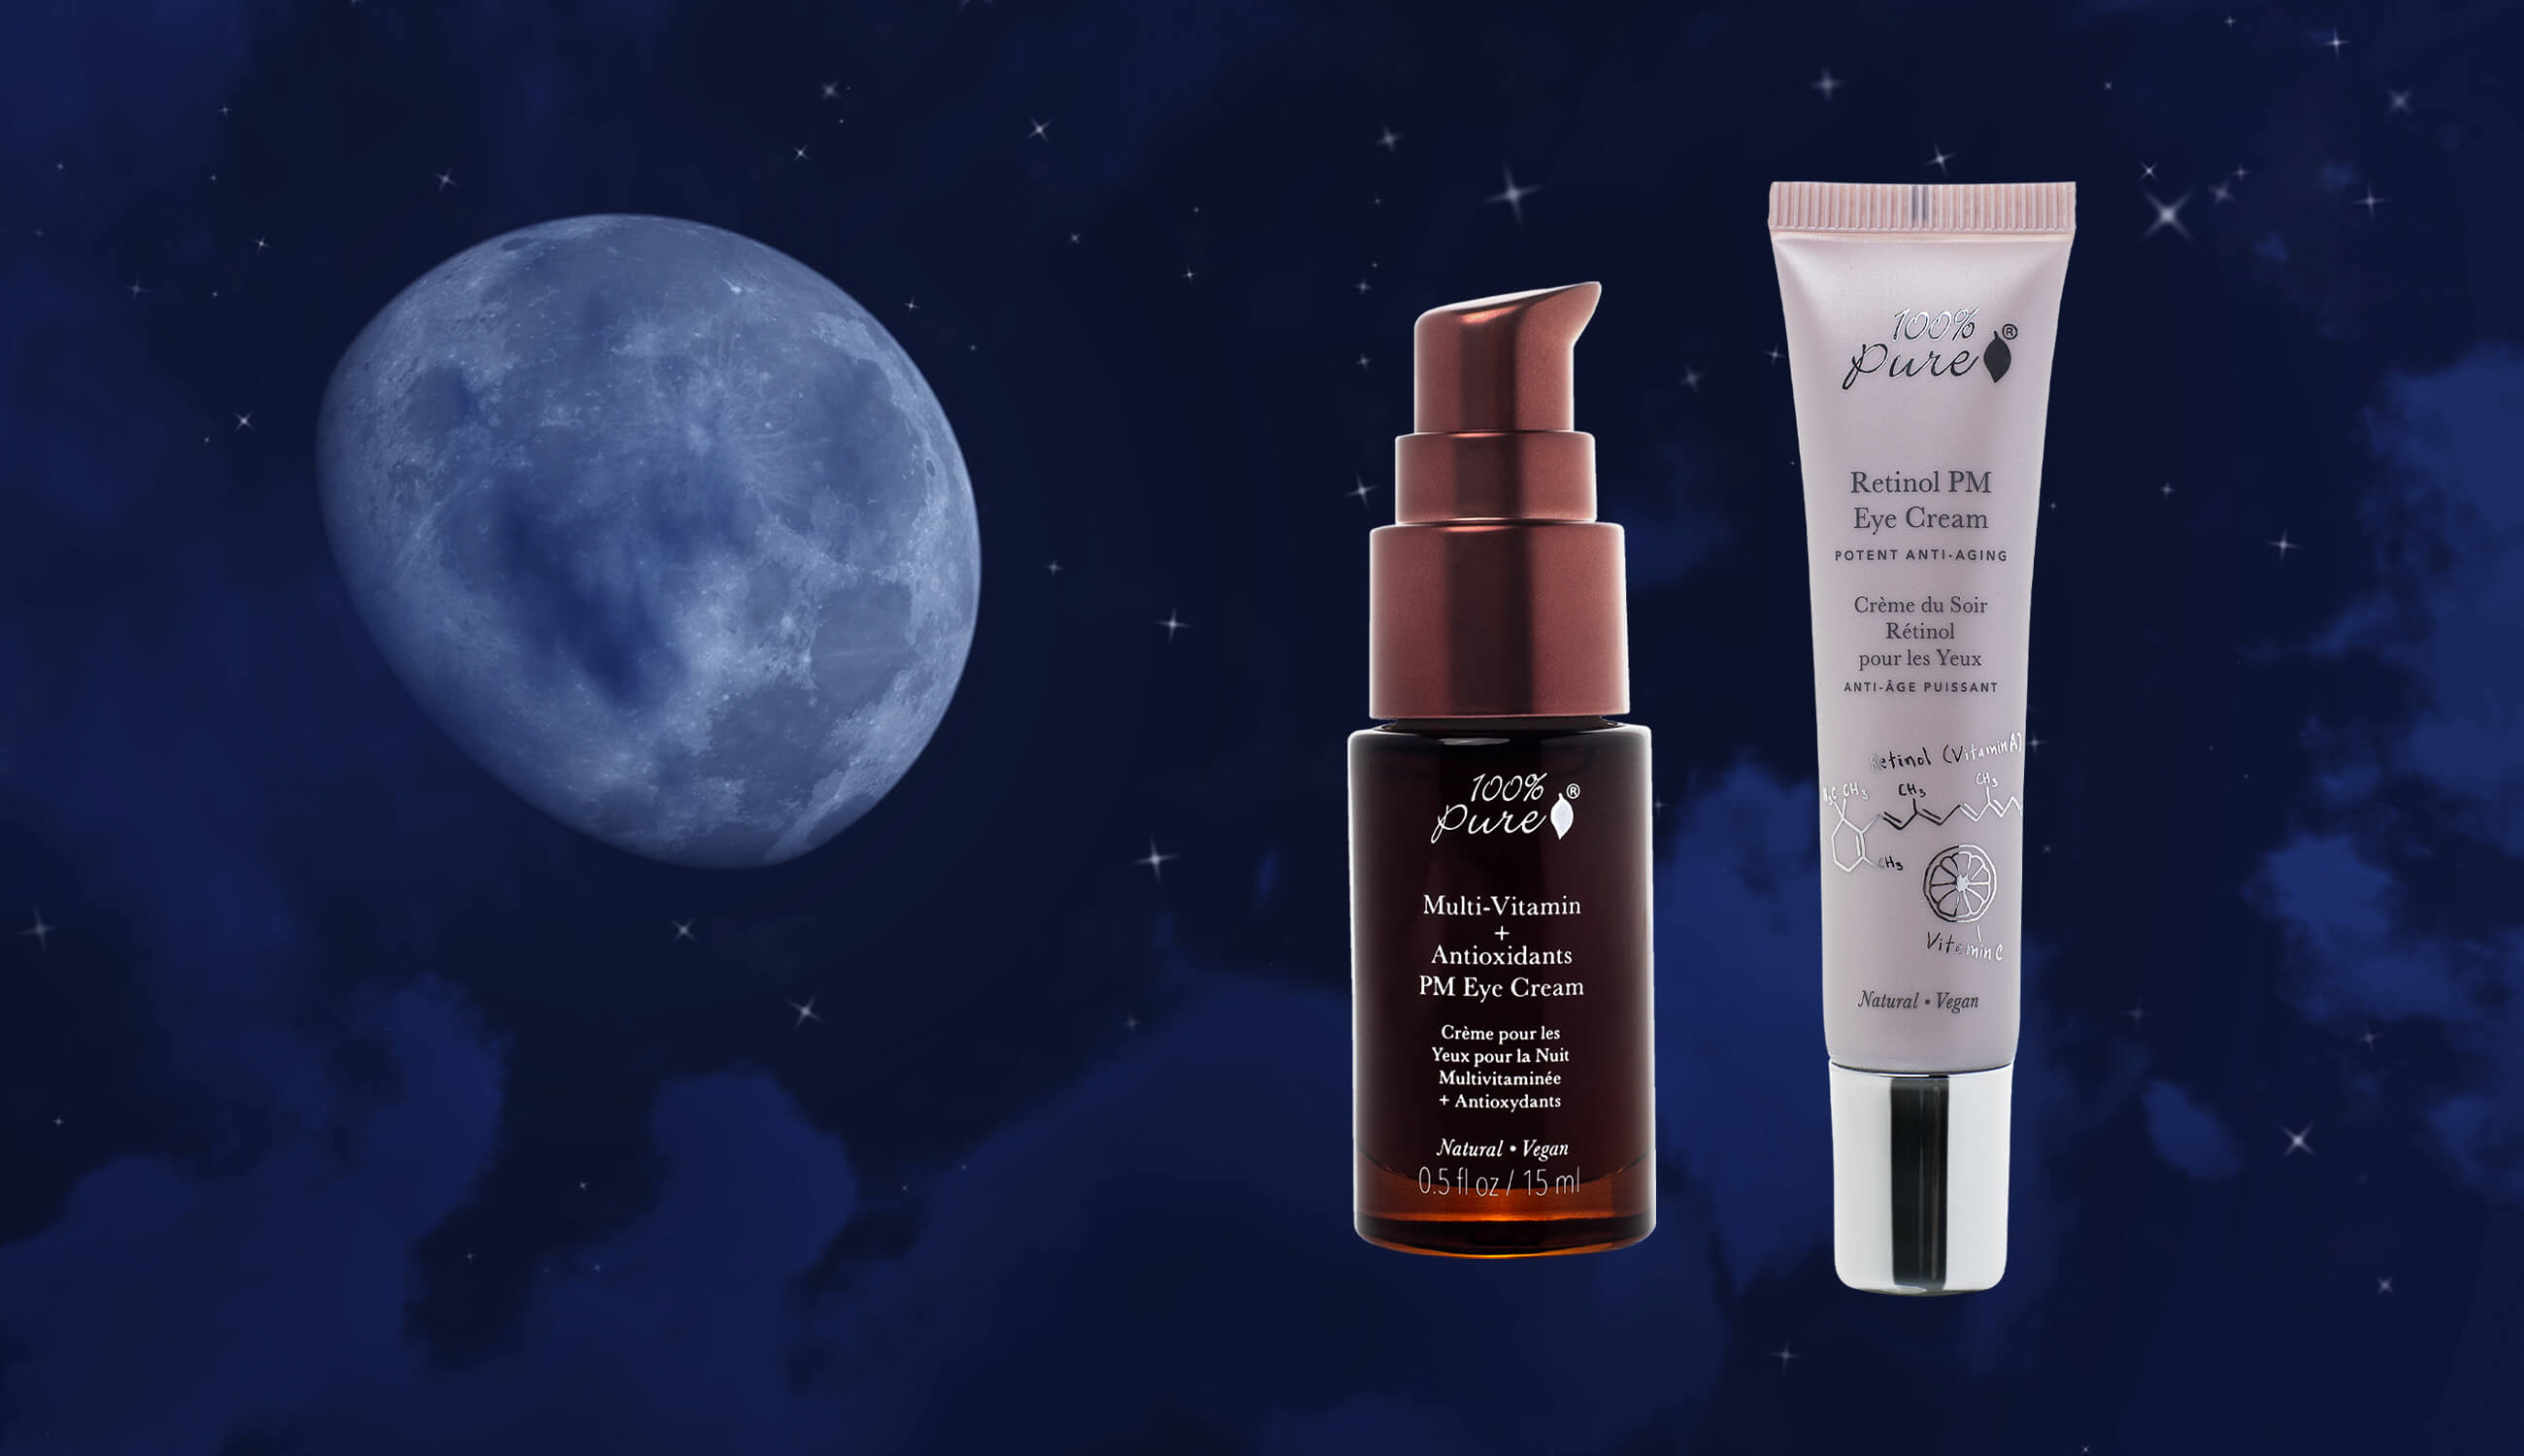 Night products